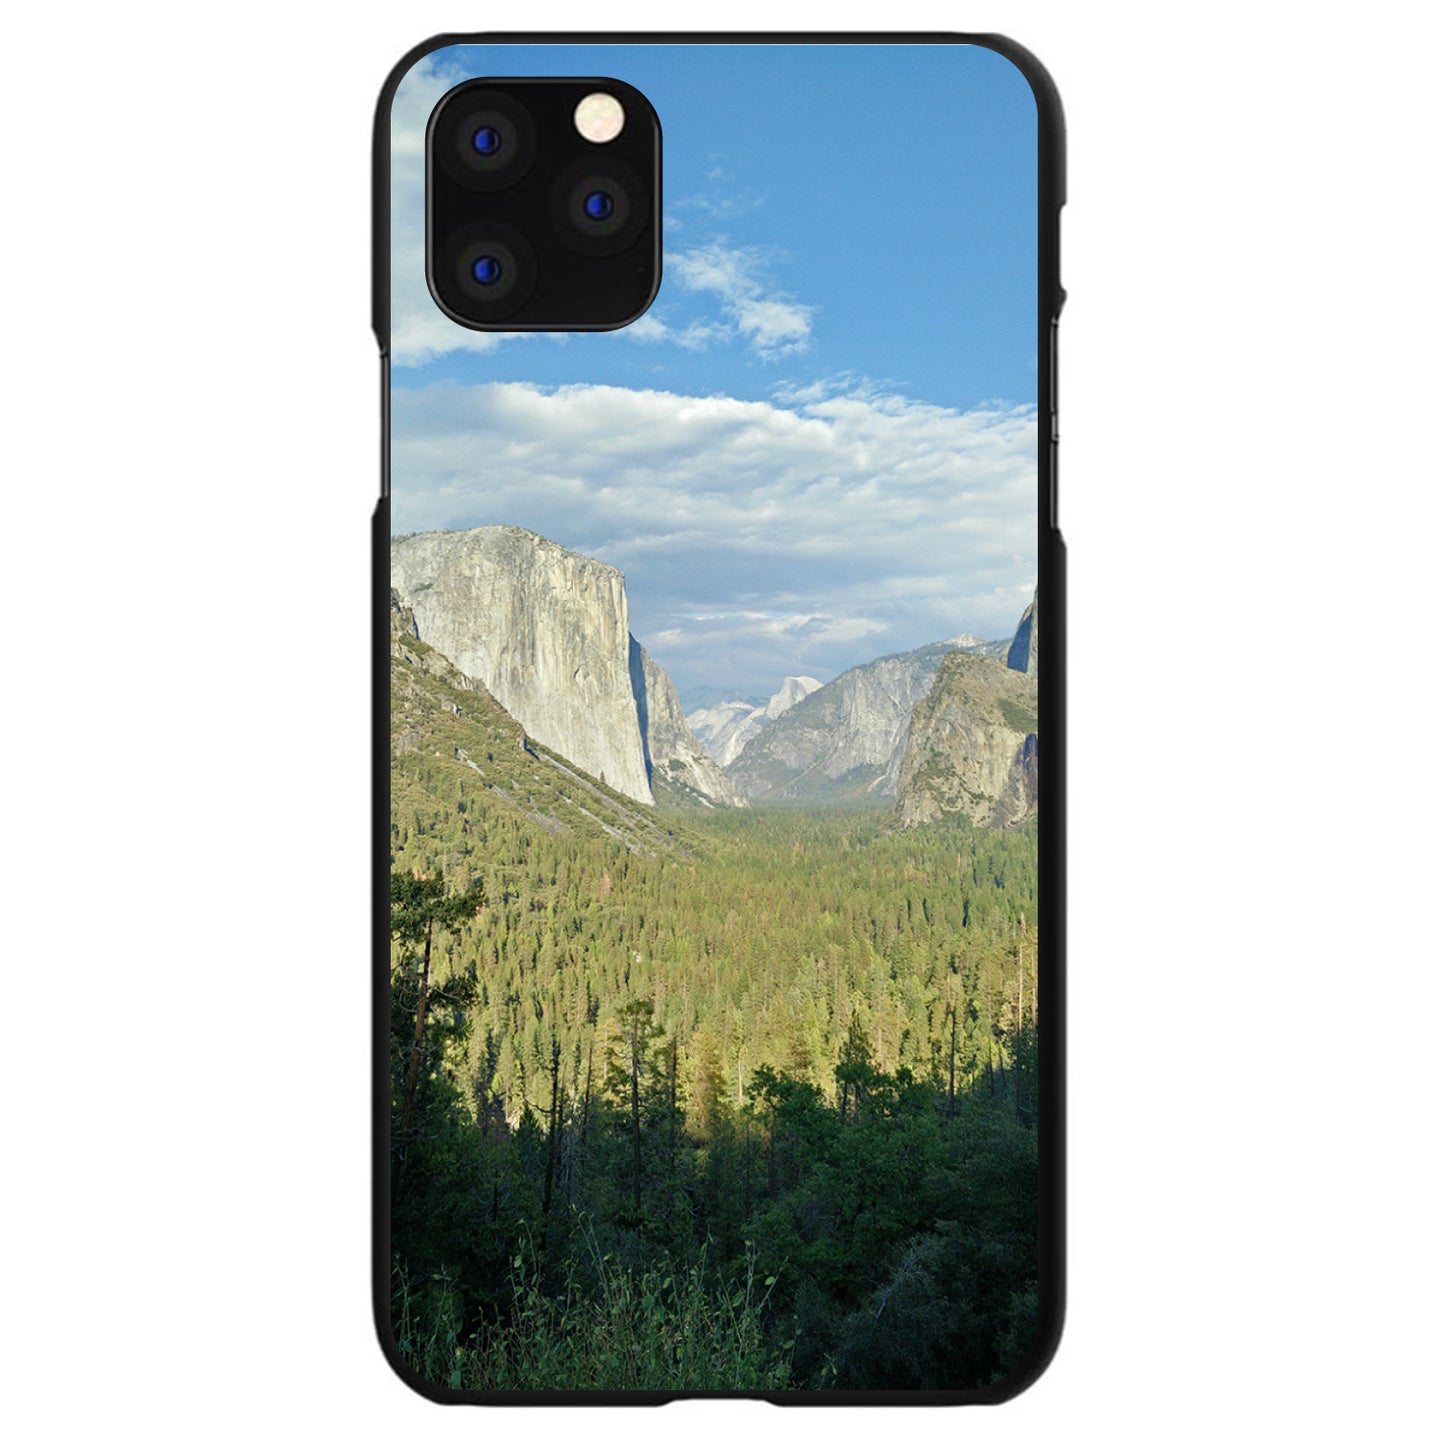 DistinctInk® Hard Plastic Snap-On Case for Apple iPhone or Samsung Galaxy - Yosemite Tunnel View